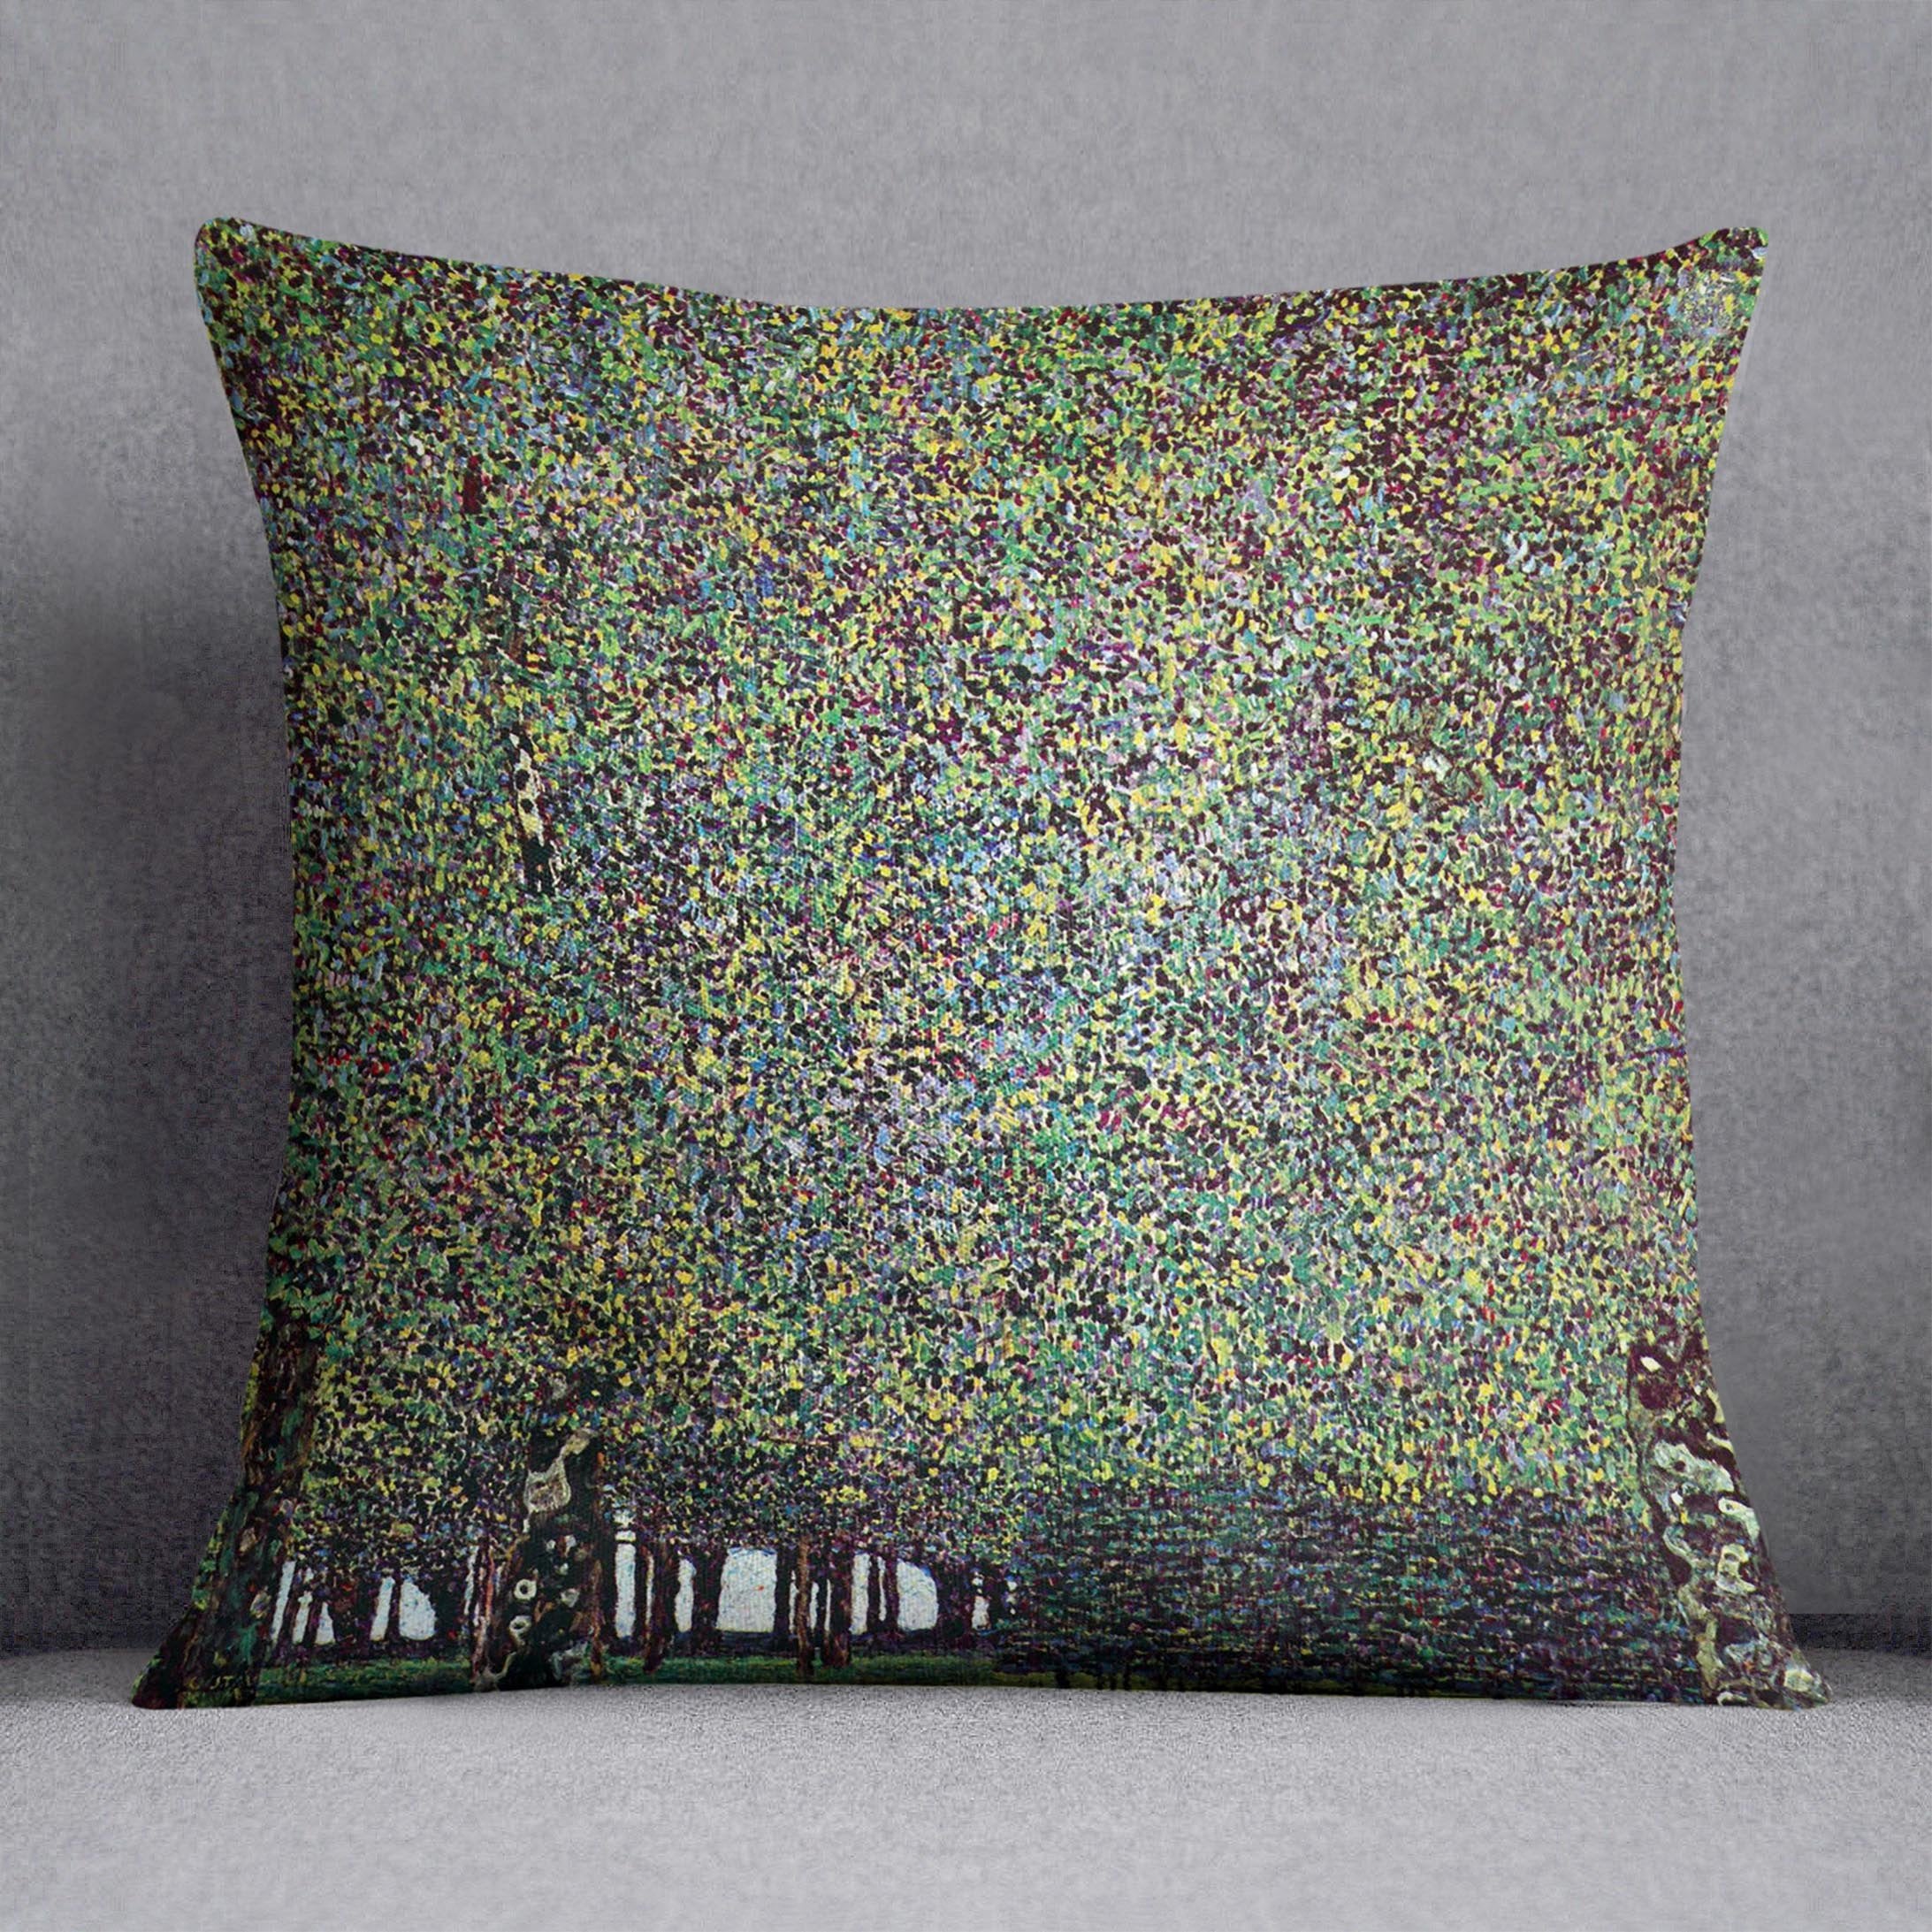 The Park by Klimt Throw Pillow